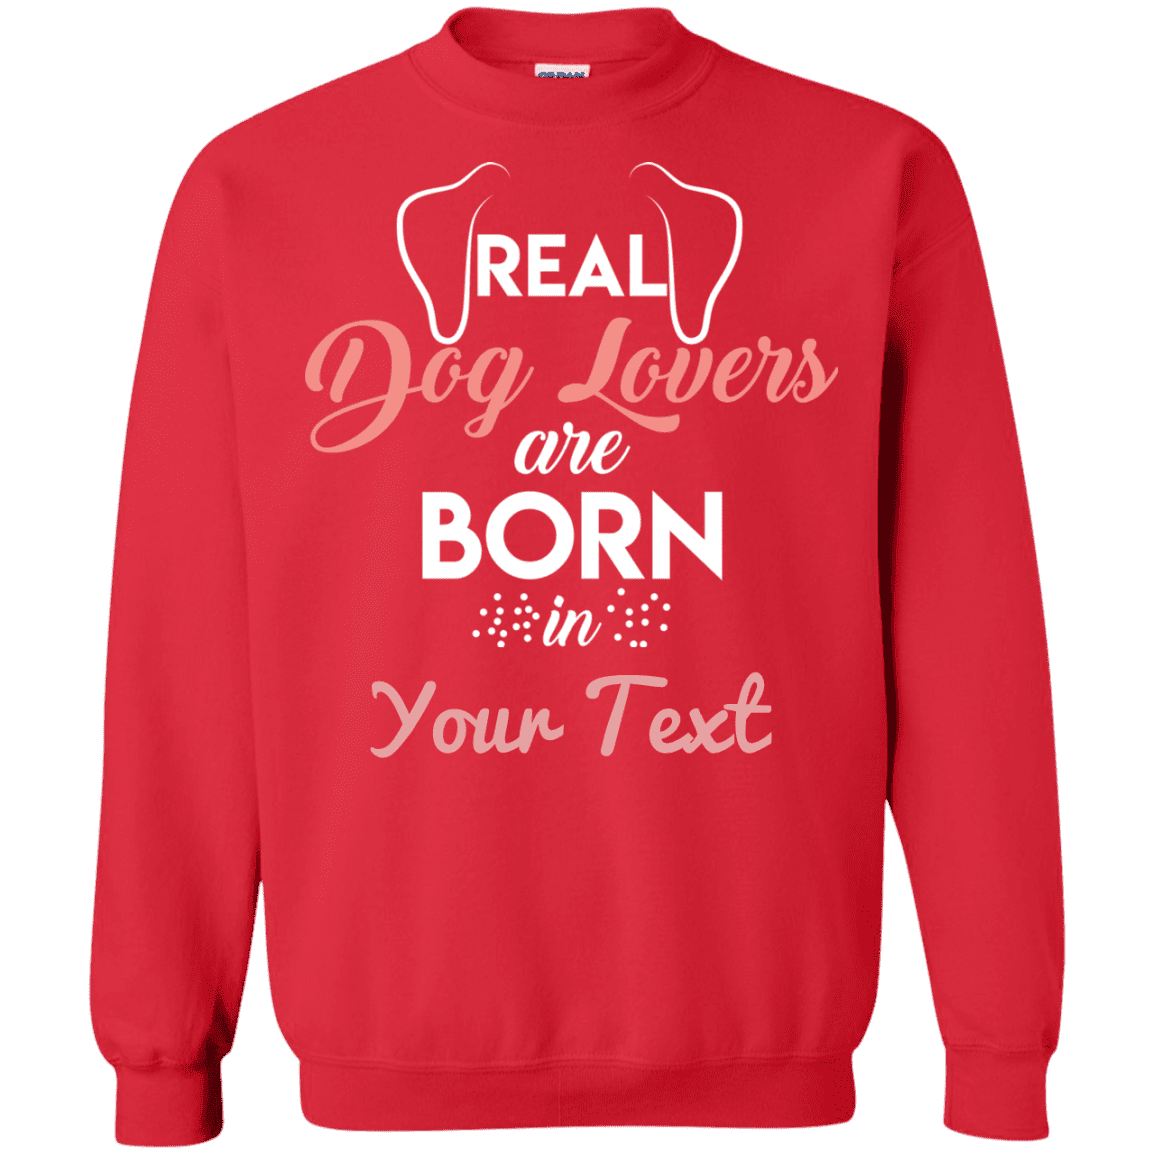 Personalized Real Dog Lovers - Sweatshirt.